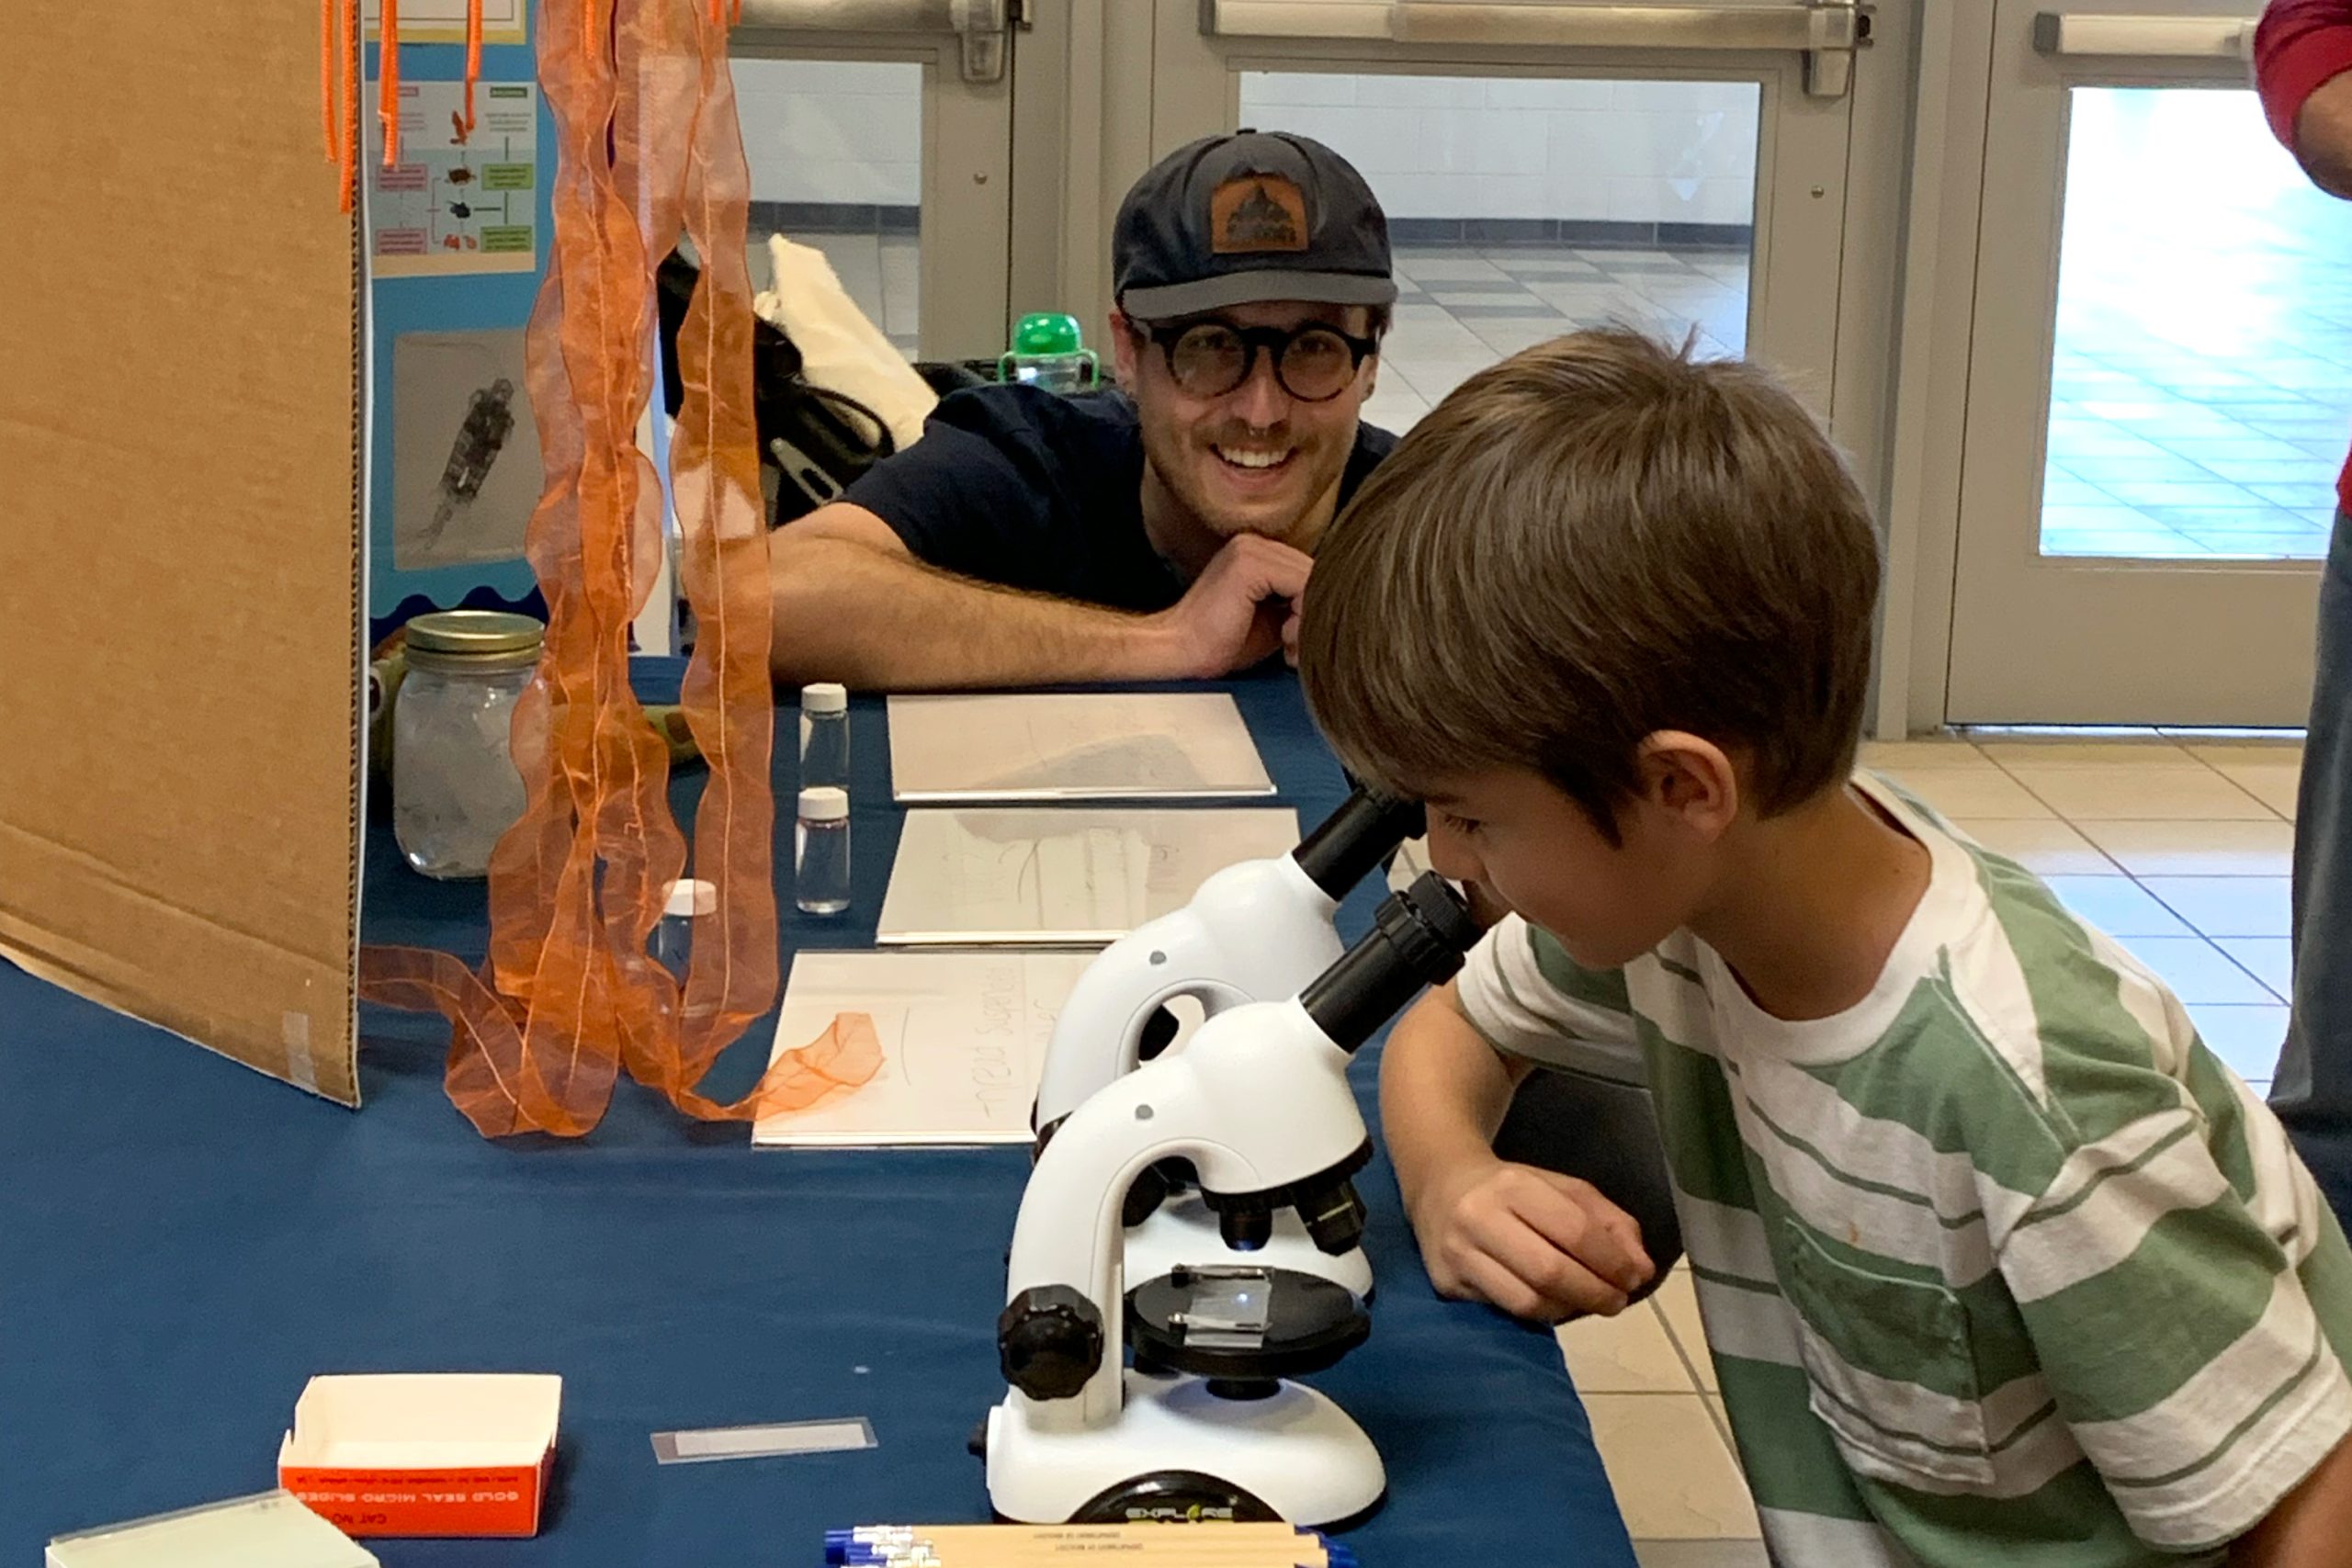 a man smiles as he watches a child look through a microscope